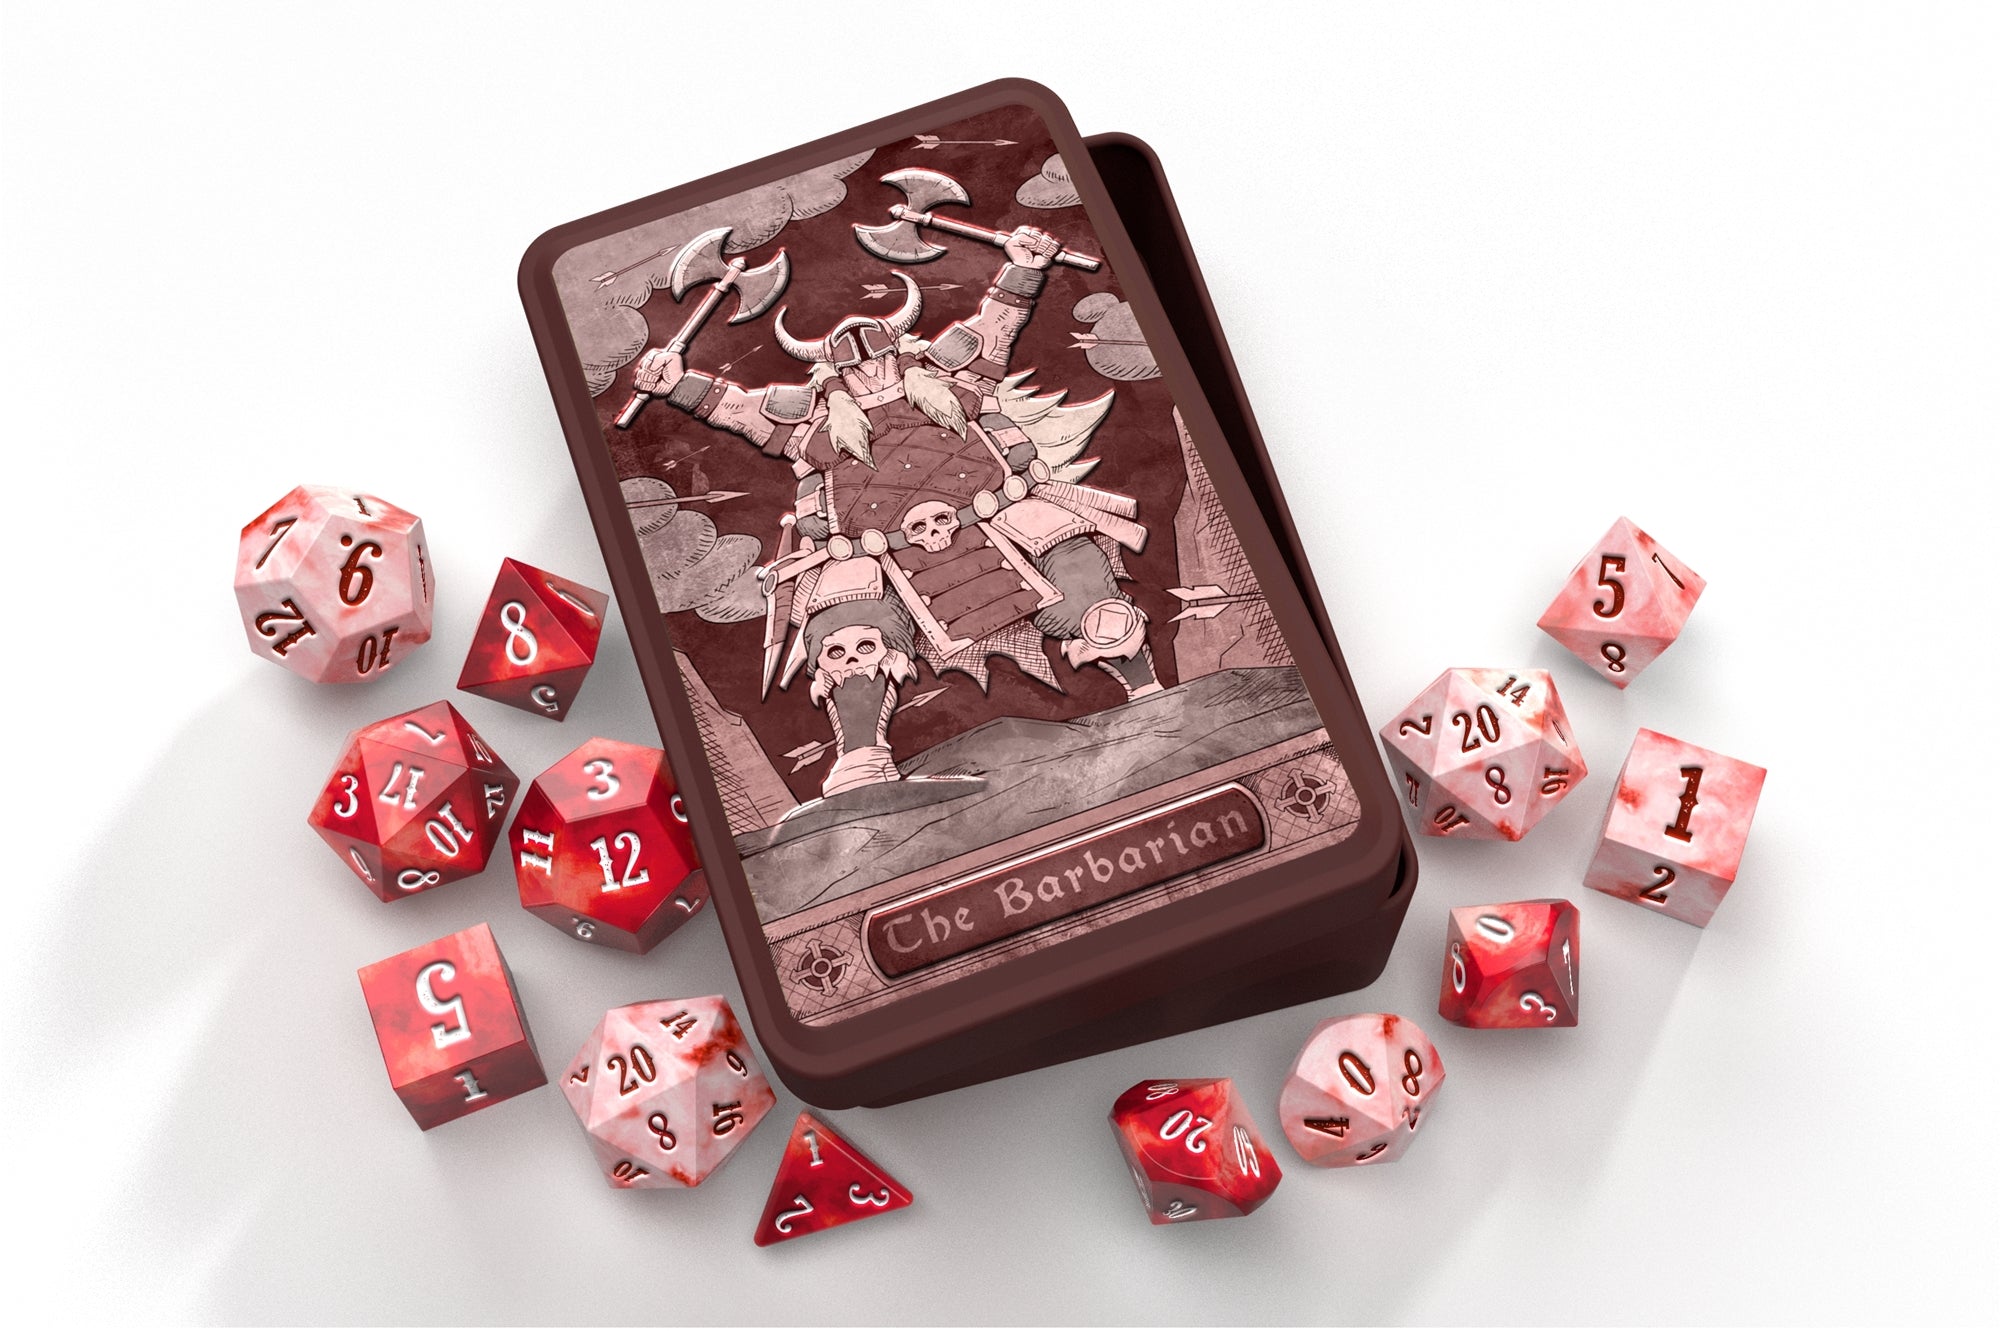 Beadle & Grimm's Dice Set - The Barbarian